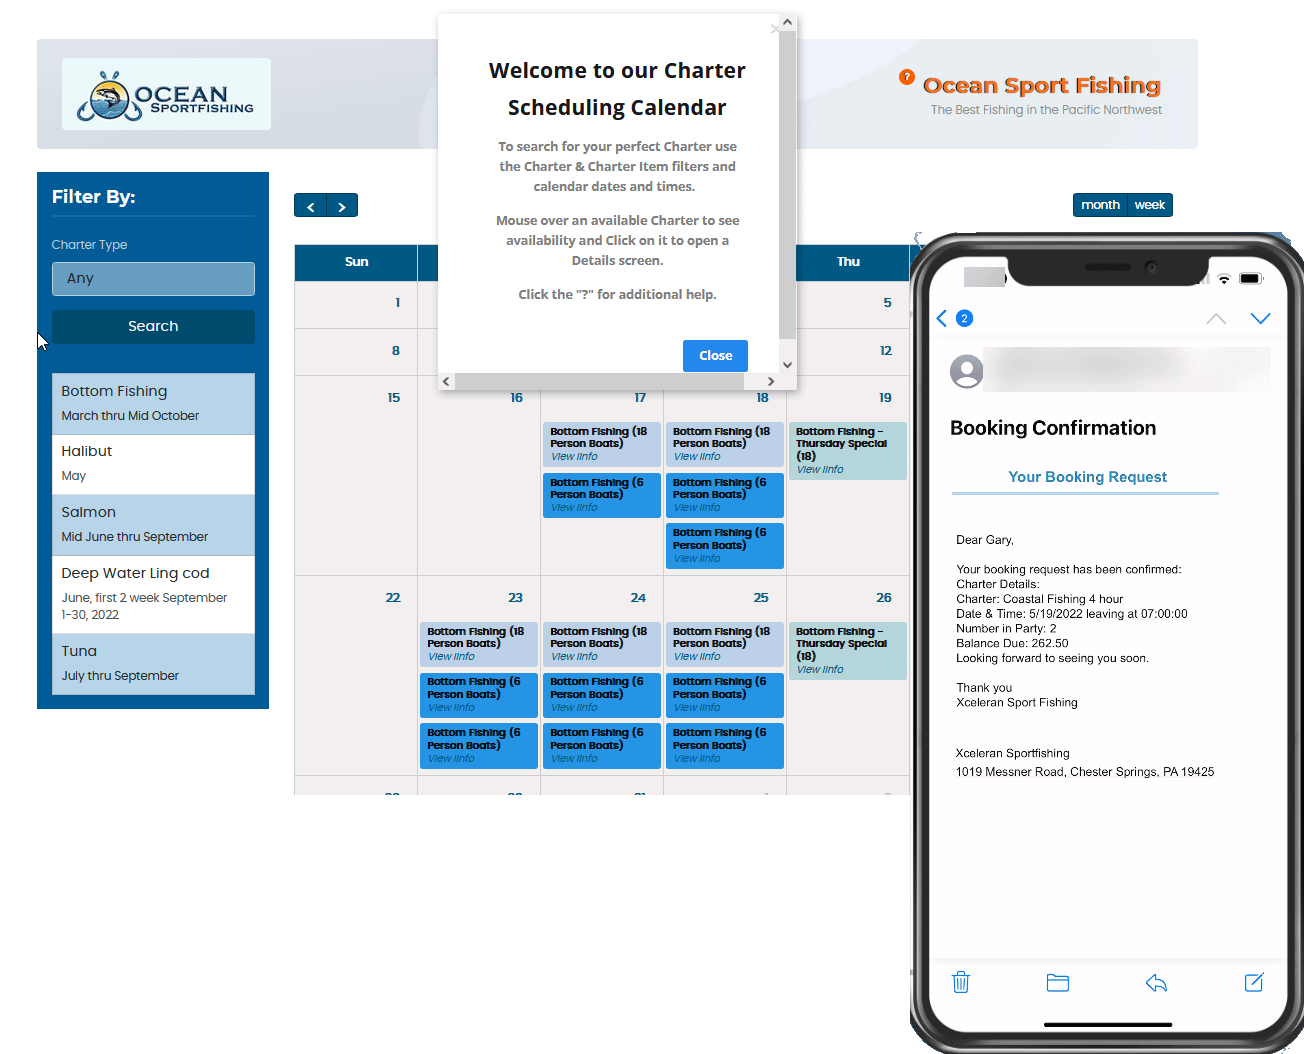 Customer Calendar with Confirmation Xceleran’s CEC Business Management System when combined with our Delay Pay Consumer financing is an especially powerful solution for Auto Shops.  It creates a simple yet powerful digital experience for you and your customers.